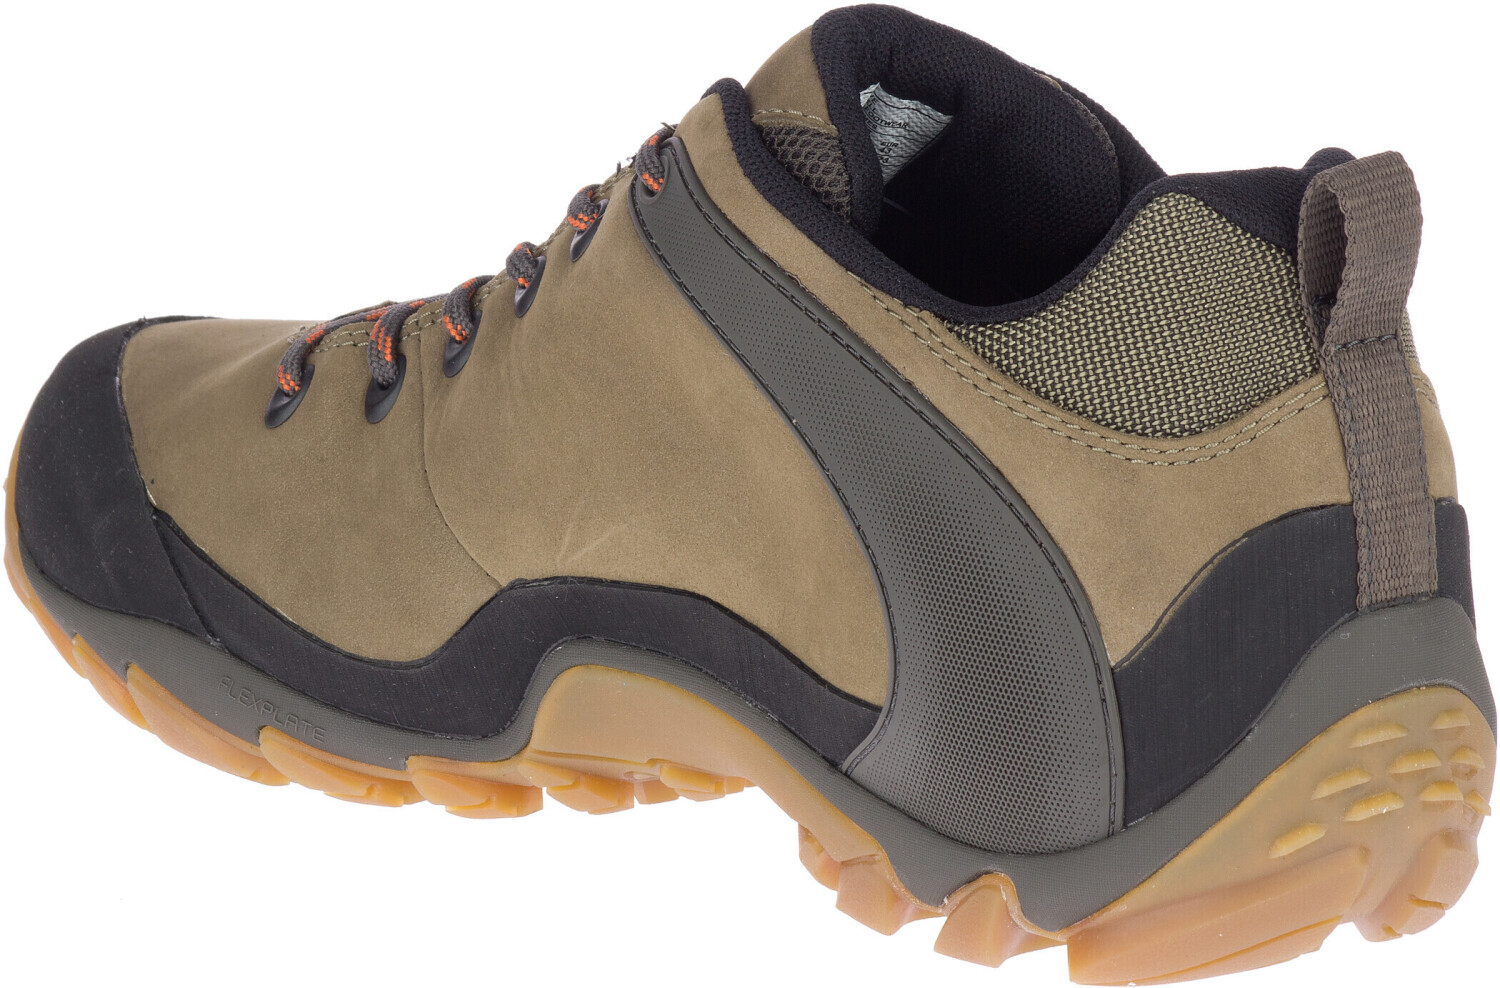 Buy Merrell Chameleon 8 Low Leather GTX olive from £94.99 (Today ...